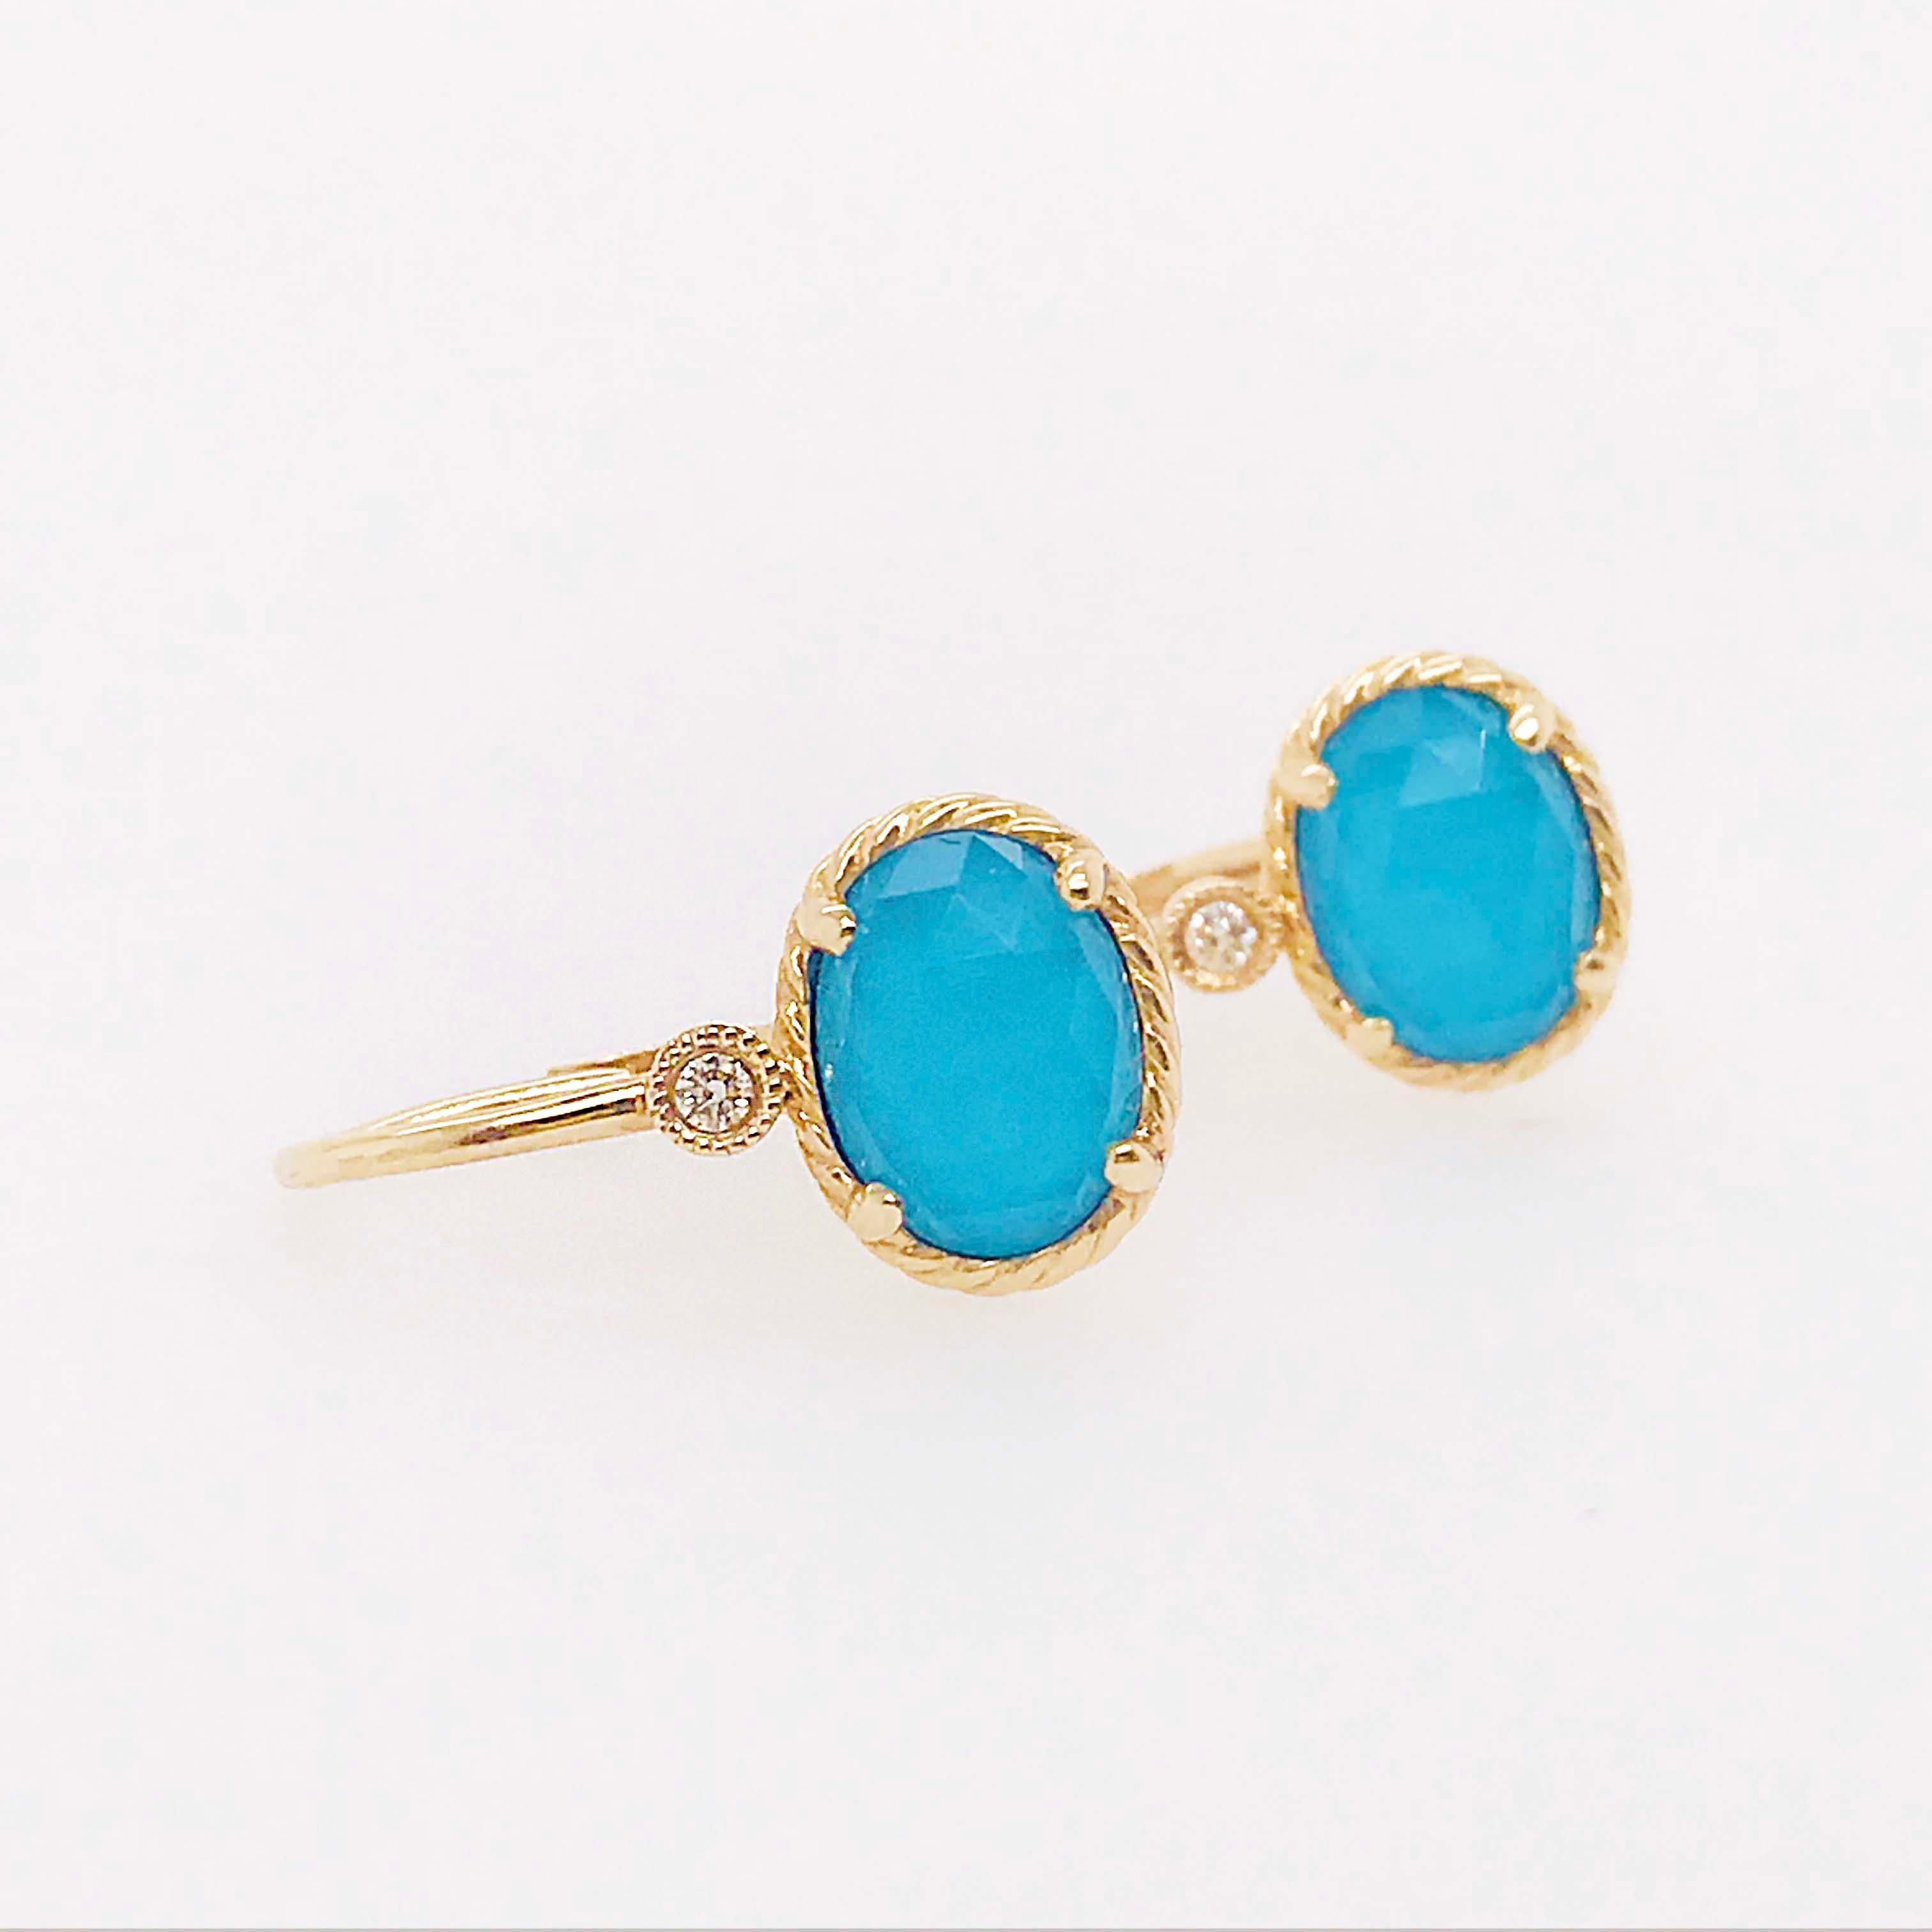 Oval Turquoise Rock Crystal & Diamond Earring Dangles in 14 Karat Gold Turquoise For Sale 5